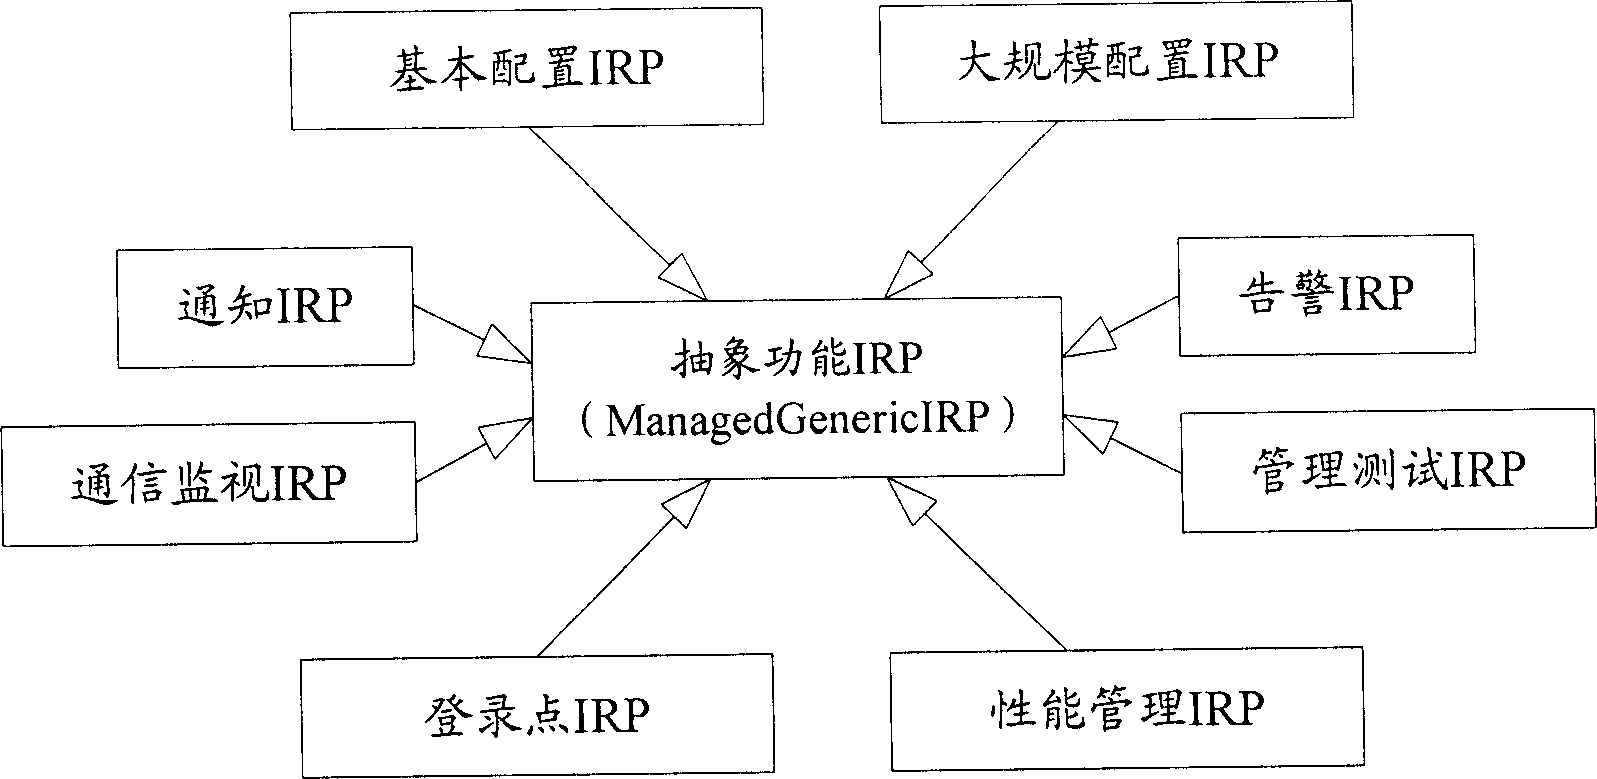 Information service hierarchy inheritance relation realizing method in network management interface